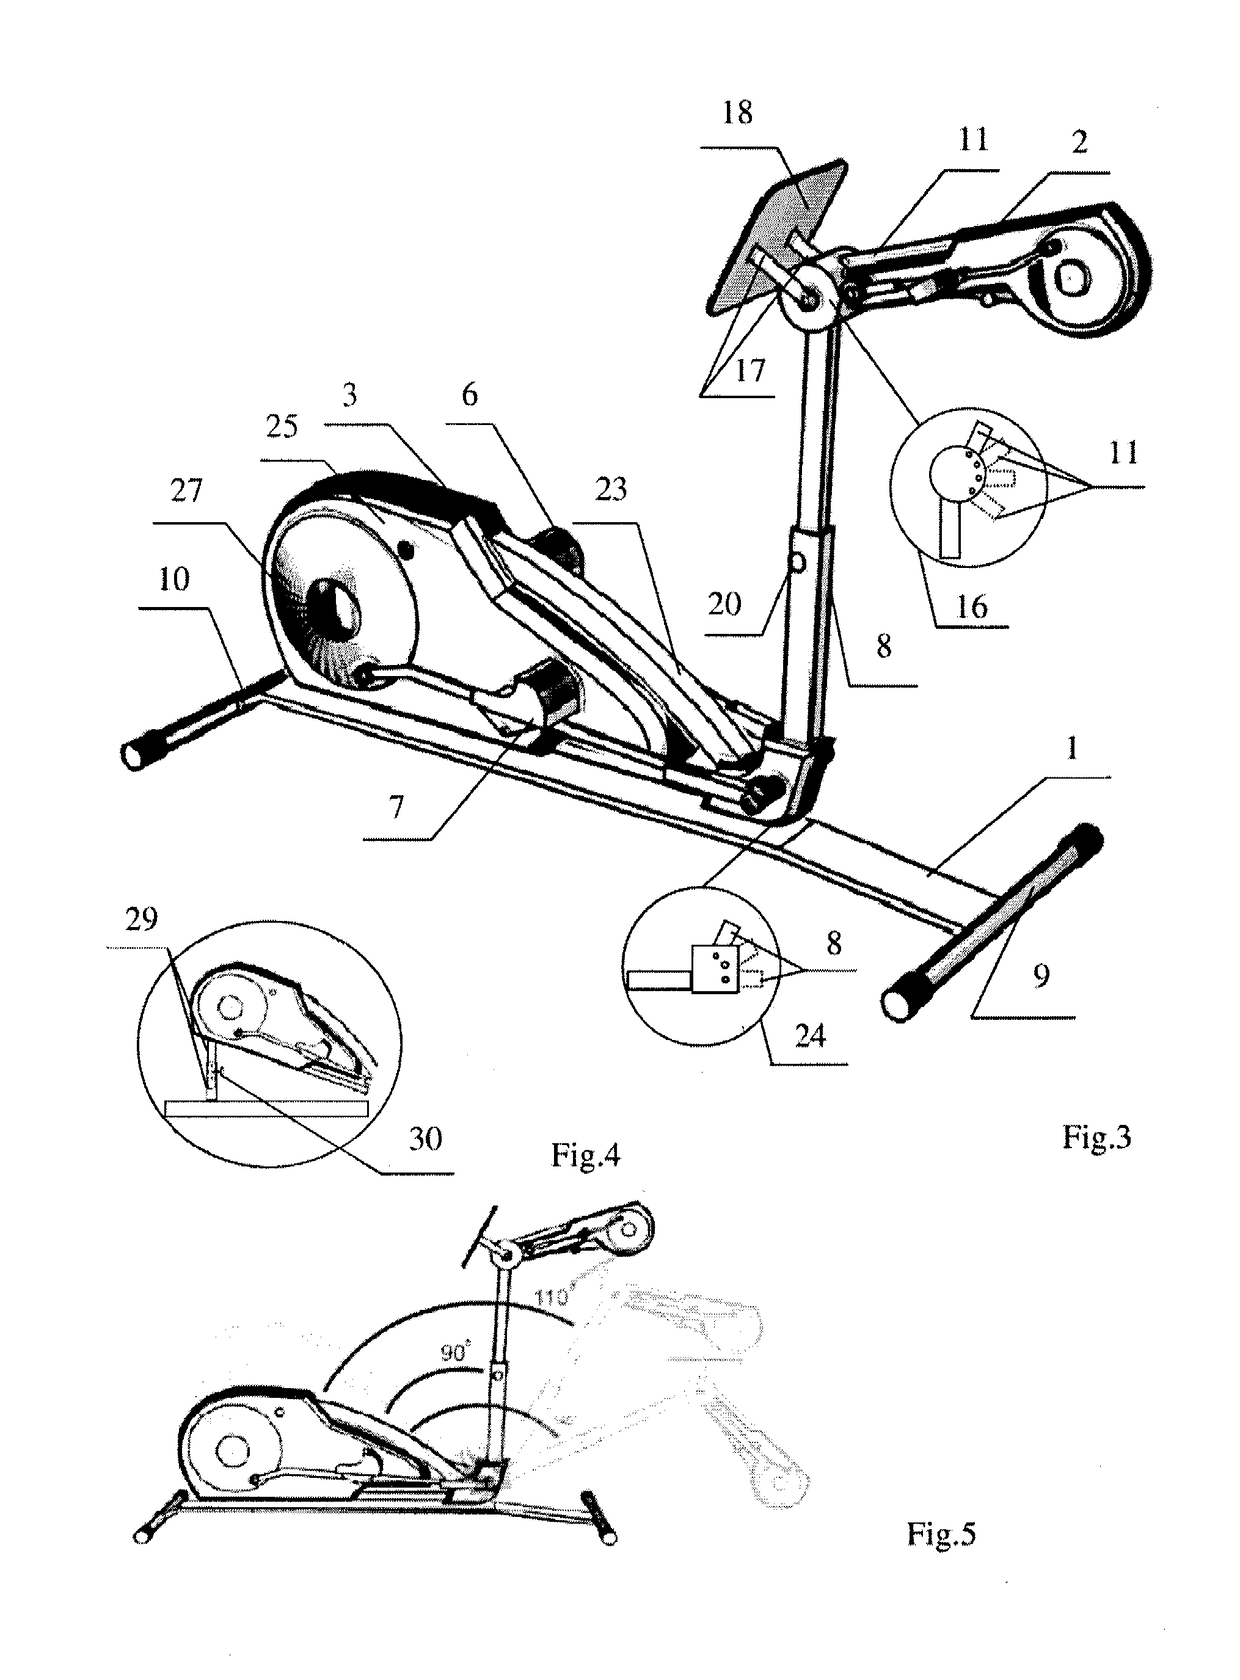 Elliptical exercise device for simultaneous training of shoulder girdle, pelvic girdle and trunk muscles in a human